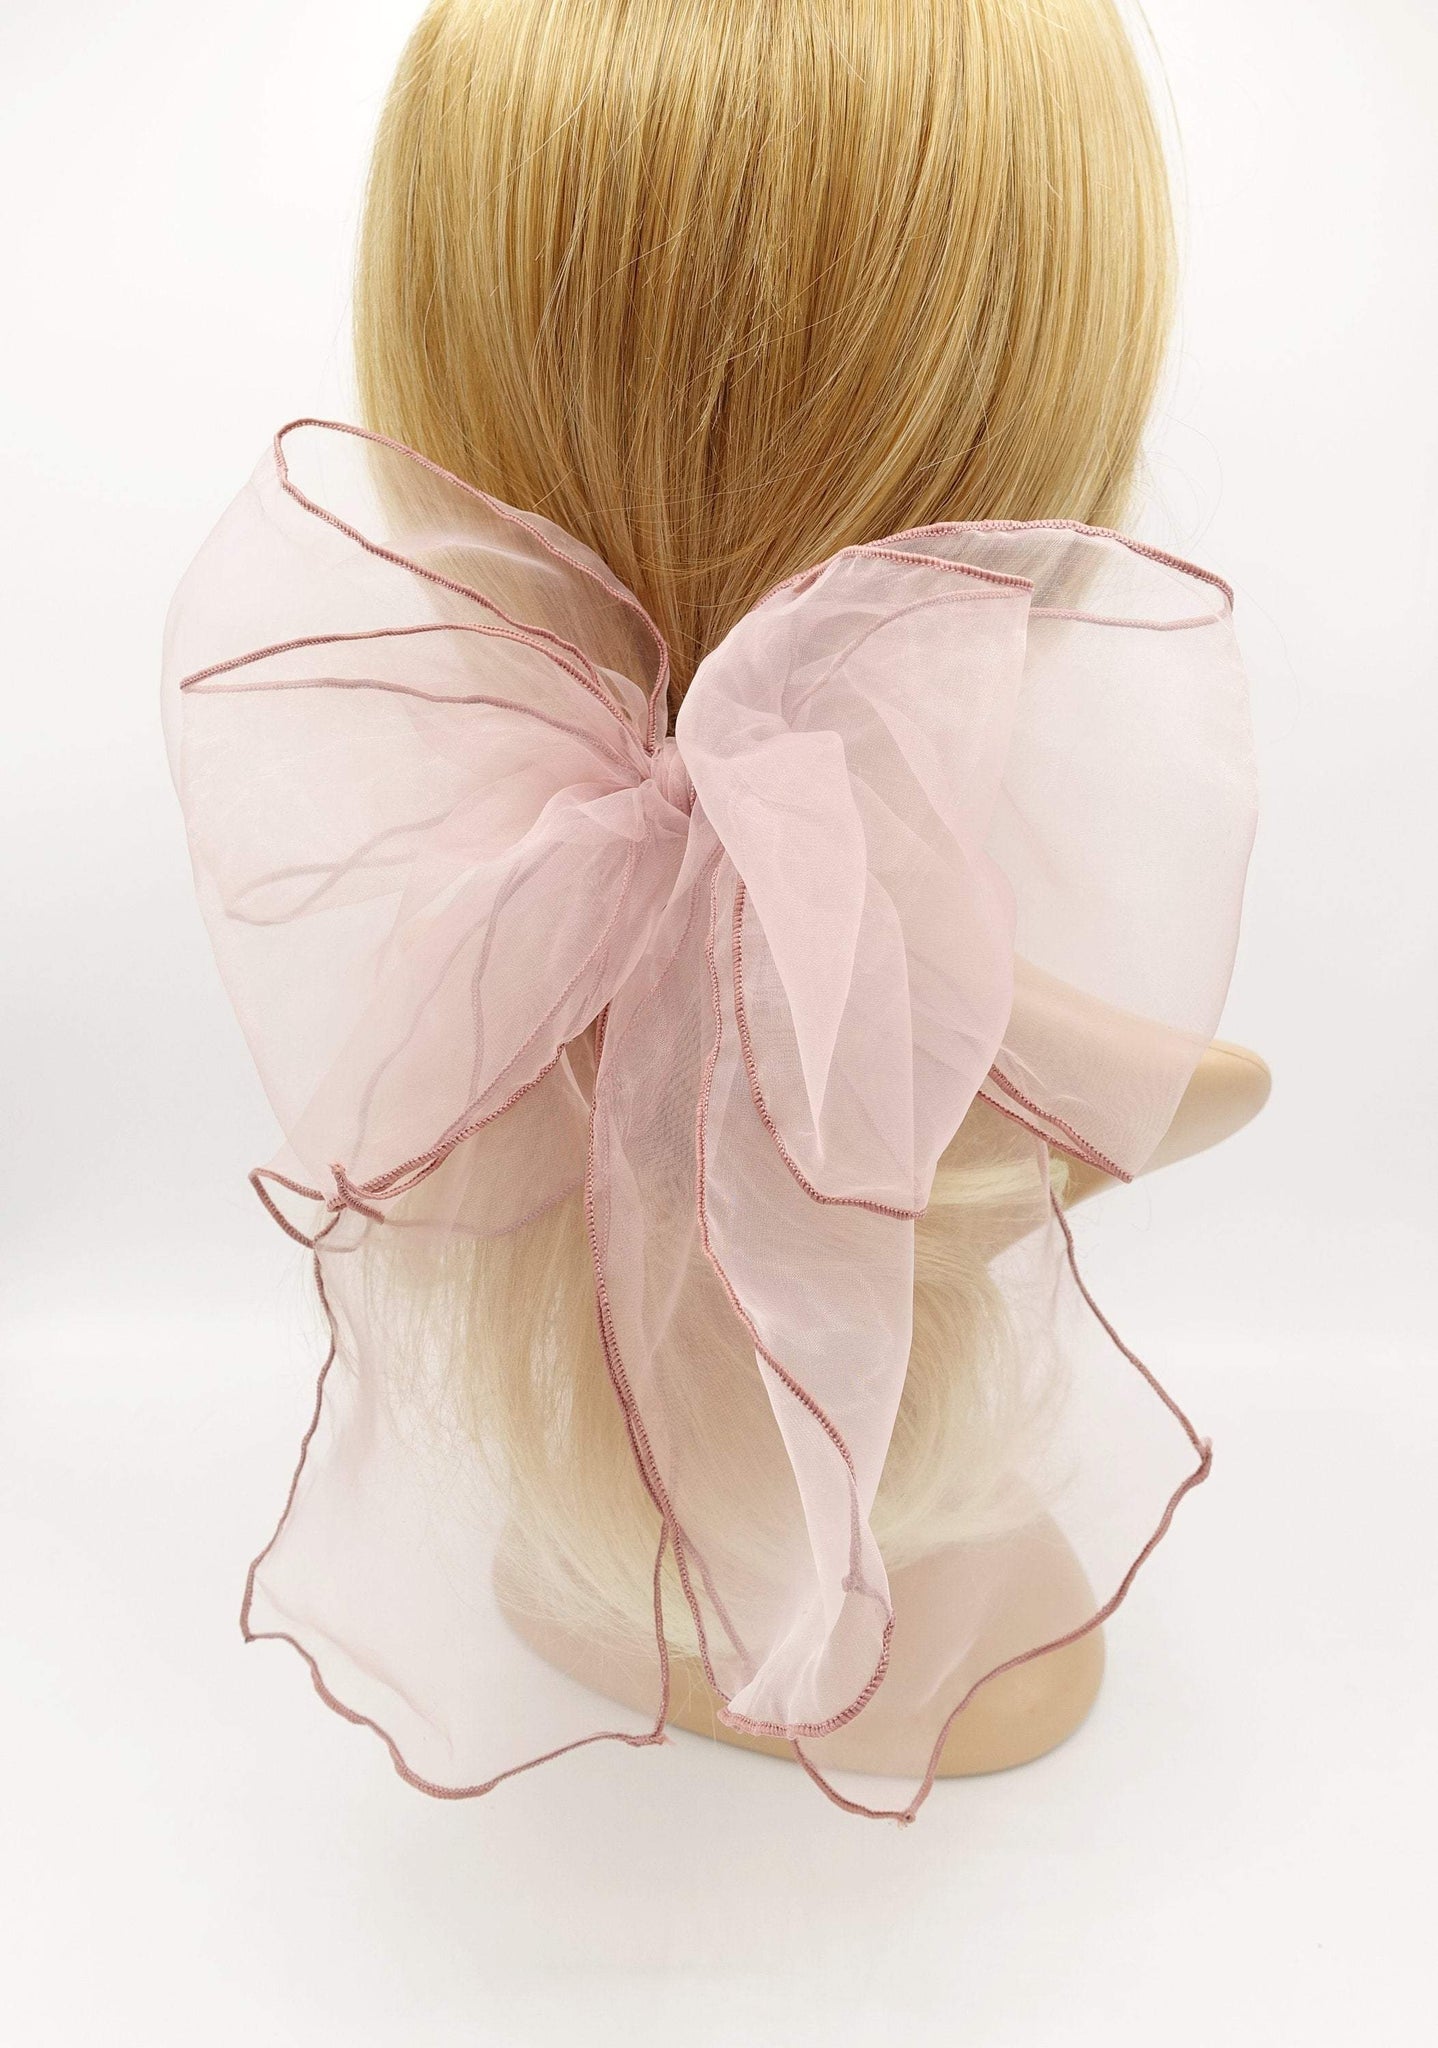 VeryShine claw/banana/barrette Mauve pink organza double layered bow for women